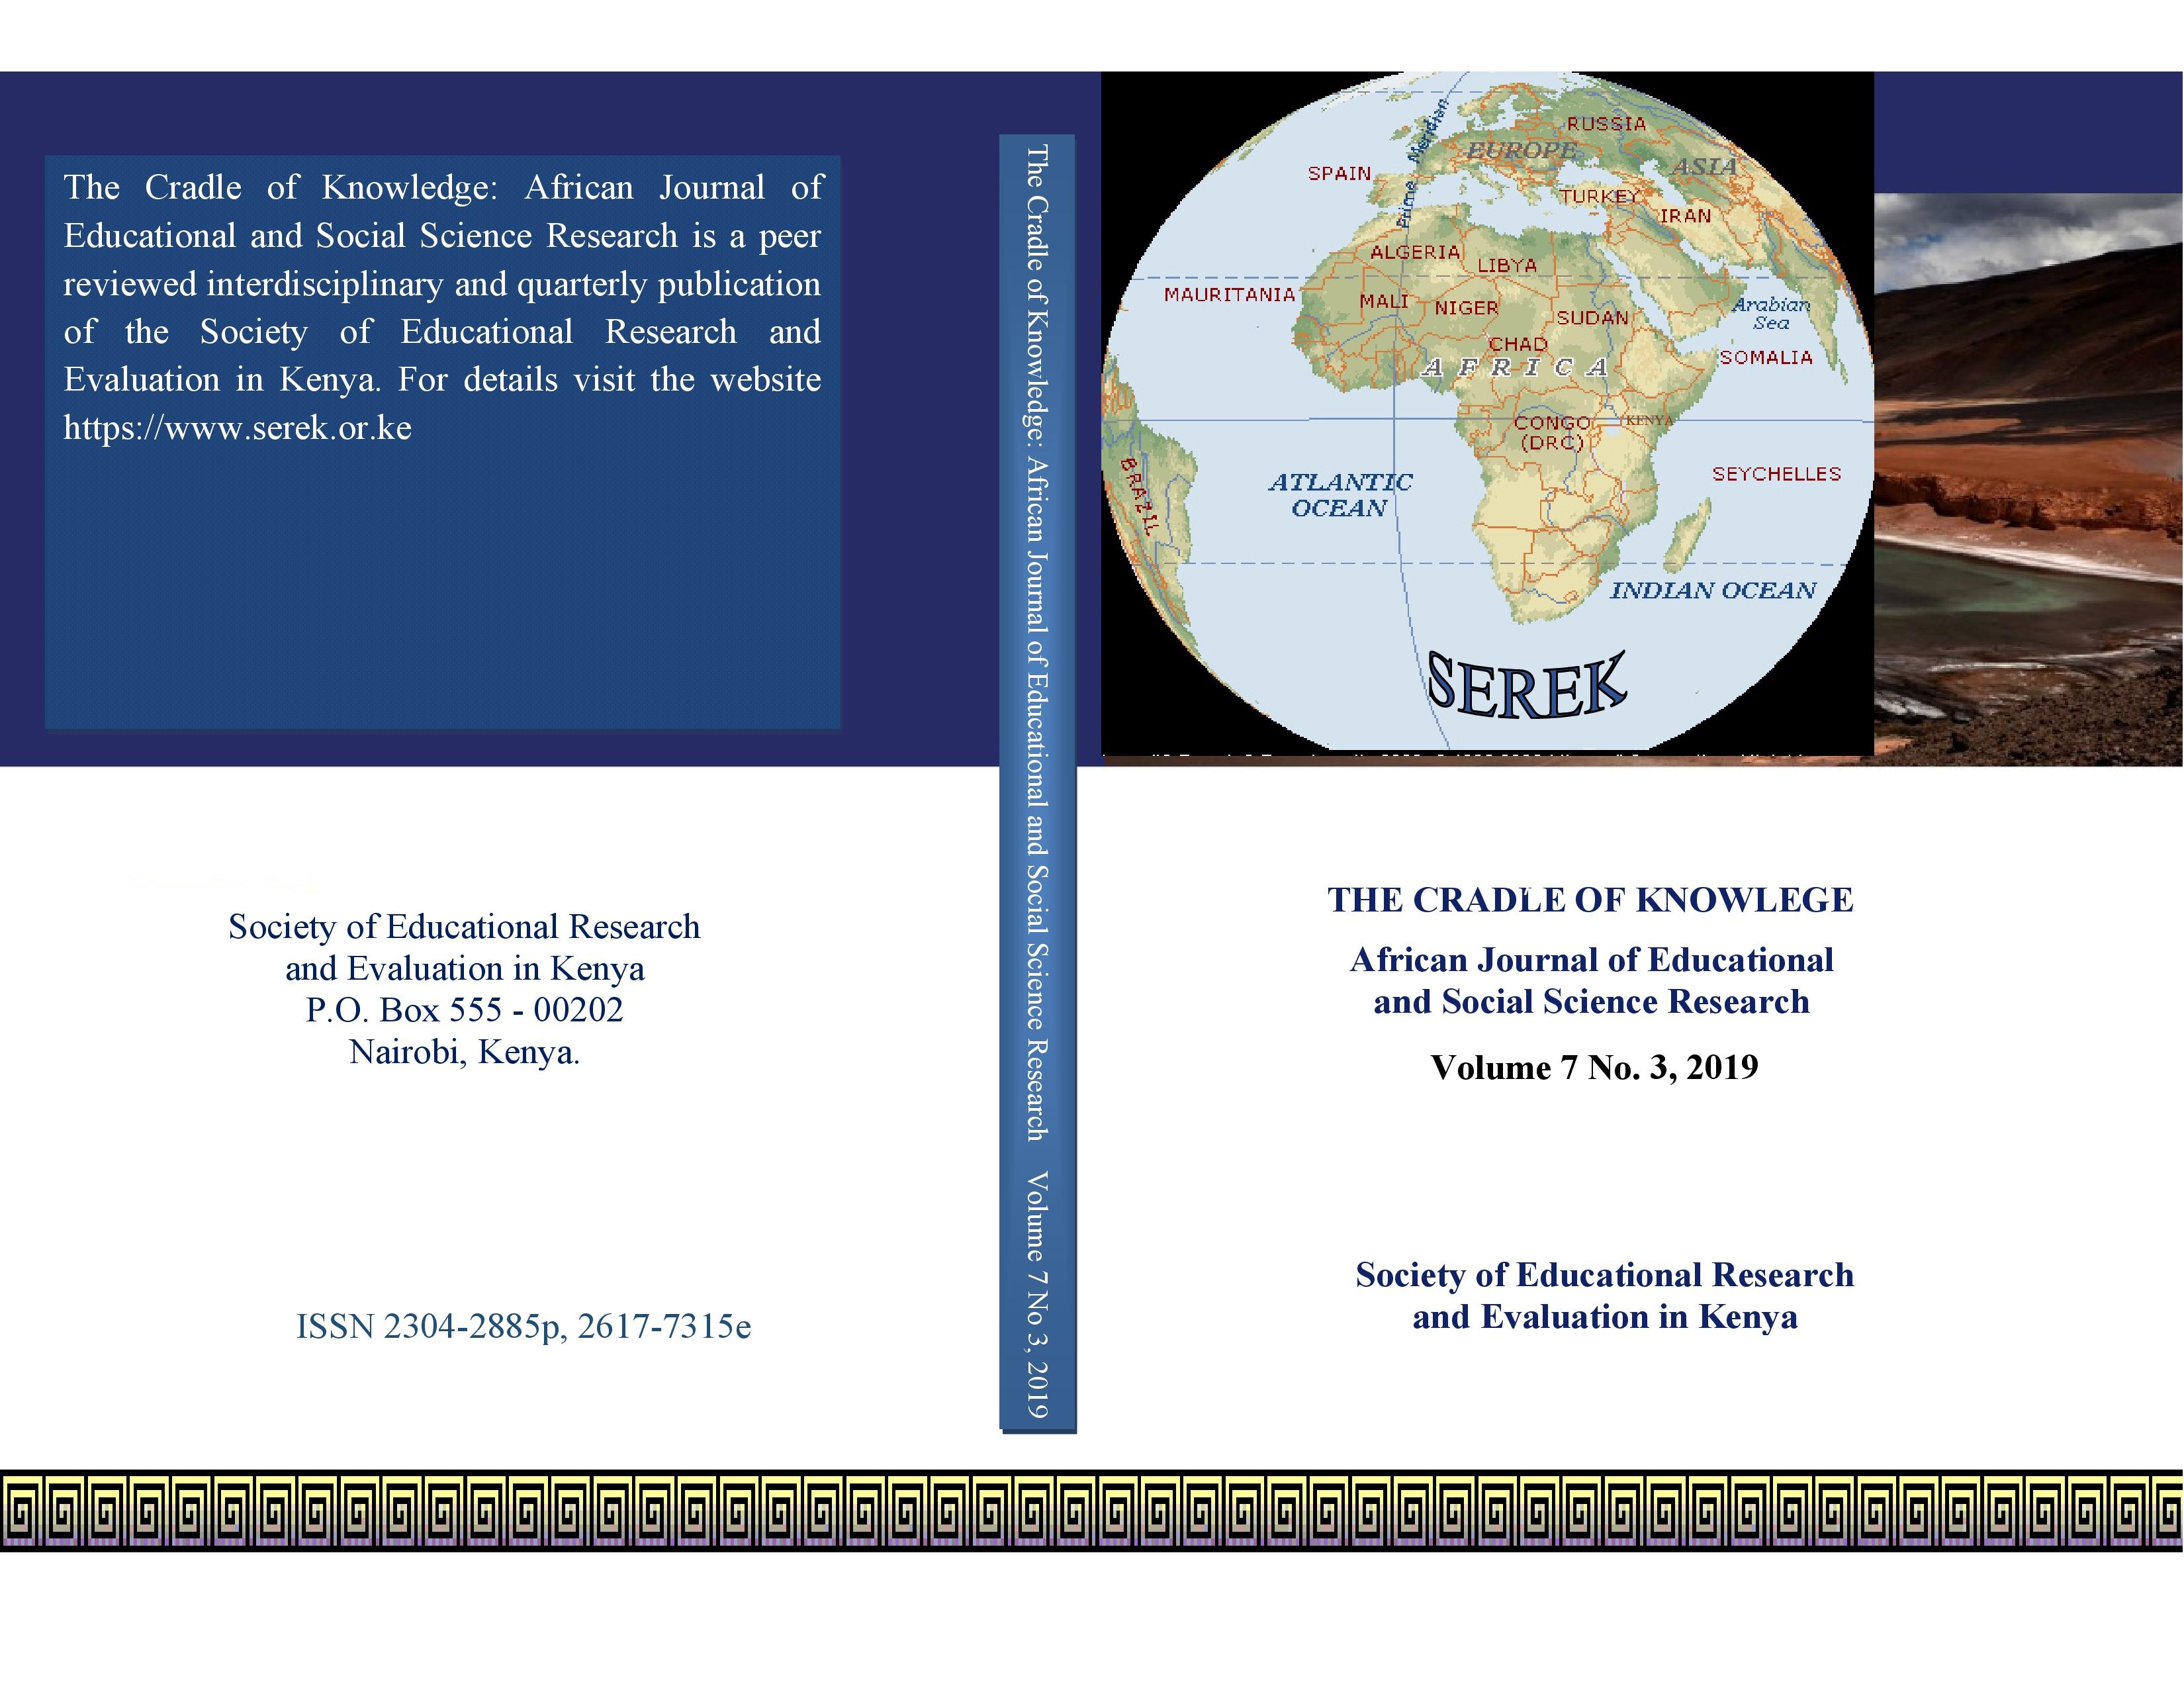 The Cradle of Knowledge: African Journal of Educational and Social Science Research